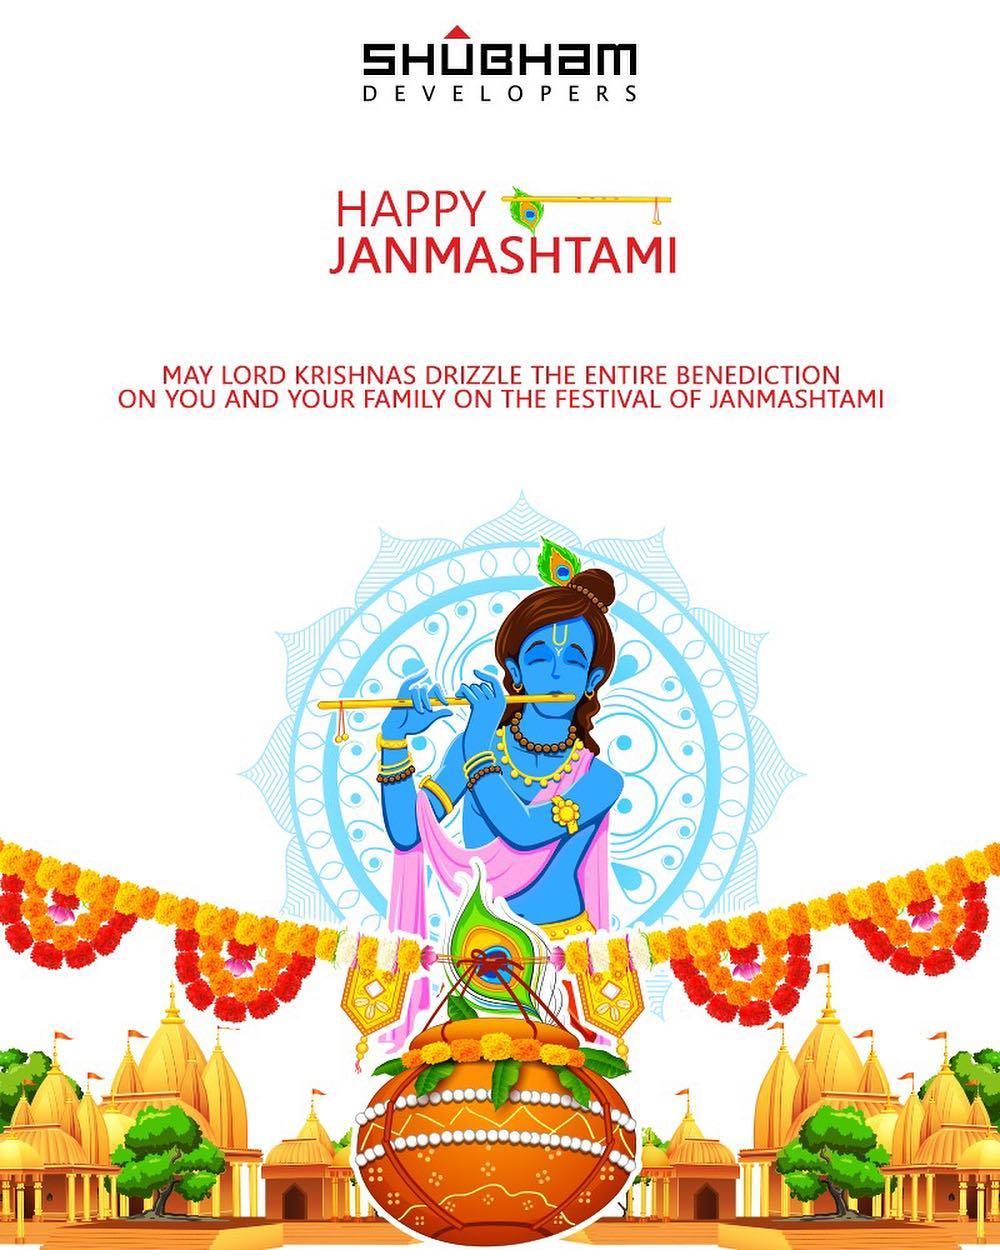 May Lord Krishnas drizzle the entire benediction on you and your family on the festival of Janmashtami.

#LordKrishna #Janmashtami #HappyJanmashtami #Janmashtami2018  #ShubhamDevelopers #RealEstate